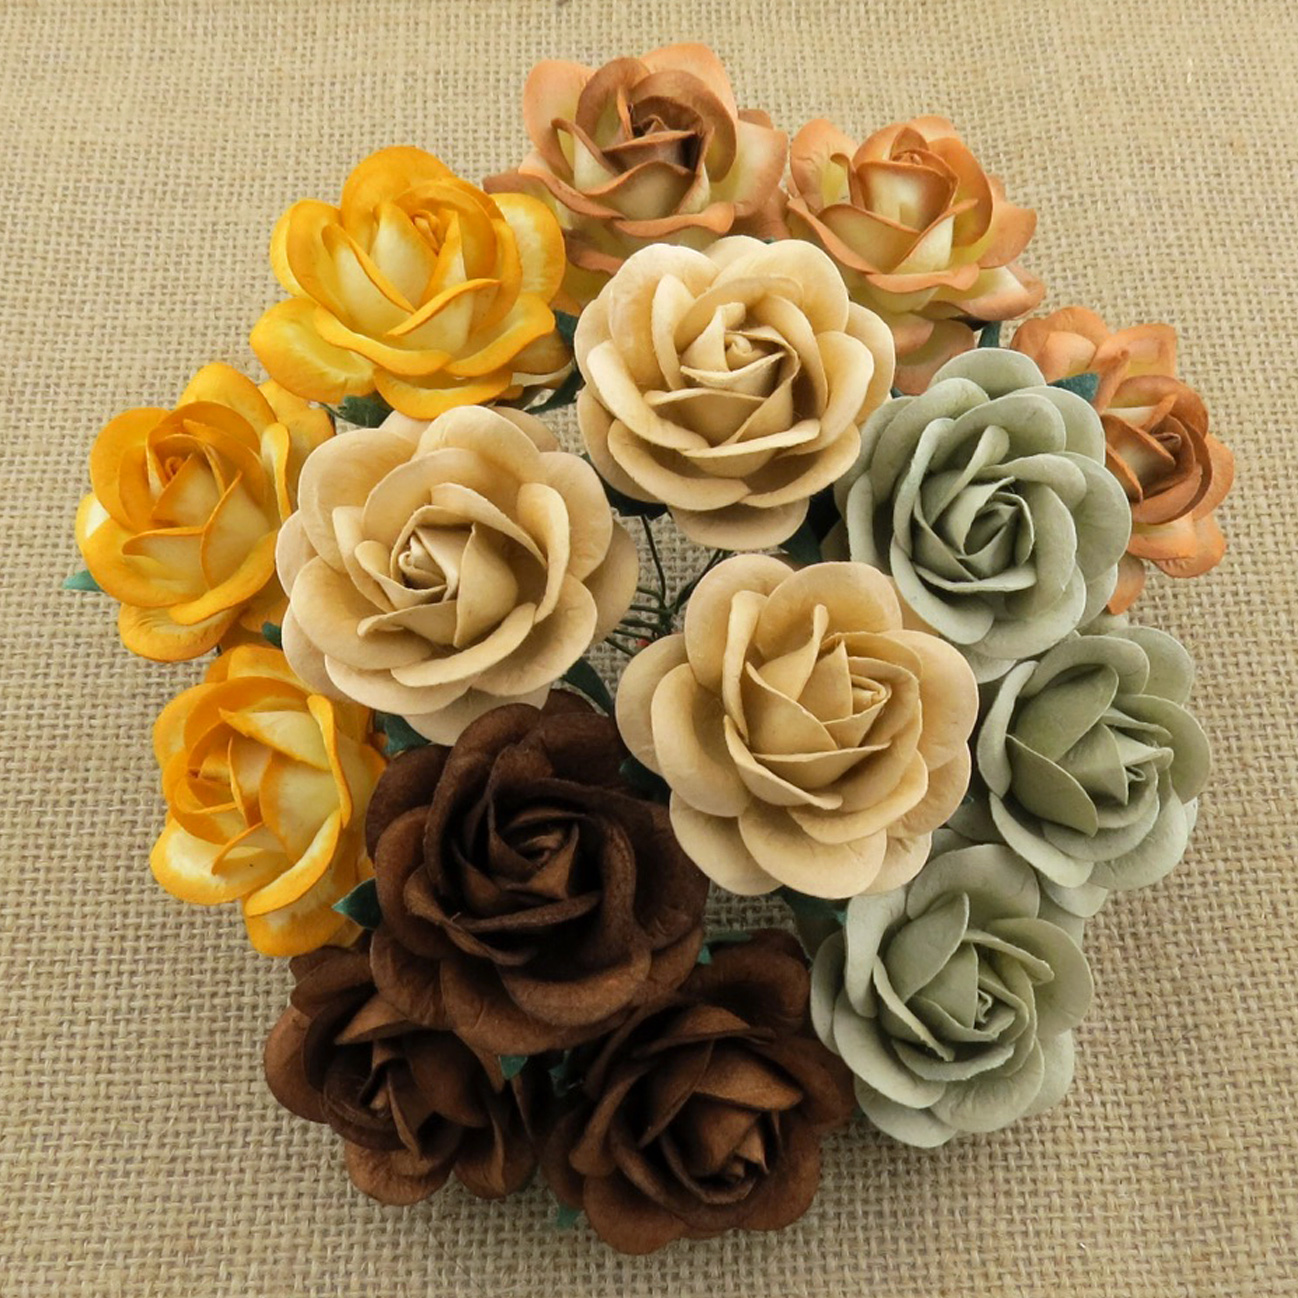 50 MIXED EARTH TONE MULBERRY PAPER TRELLIS ROSES - 5 COLOR